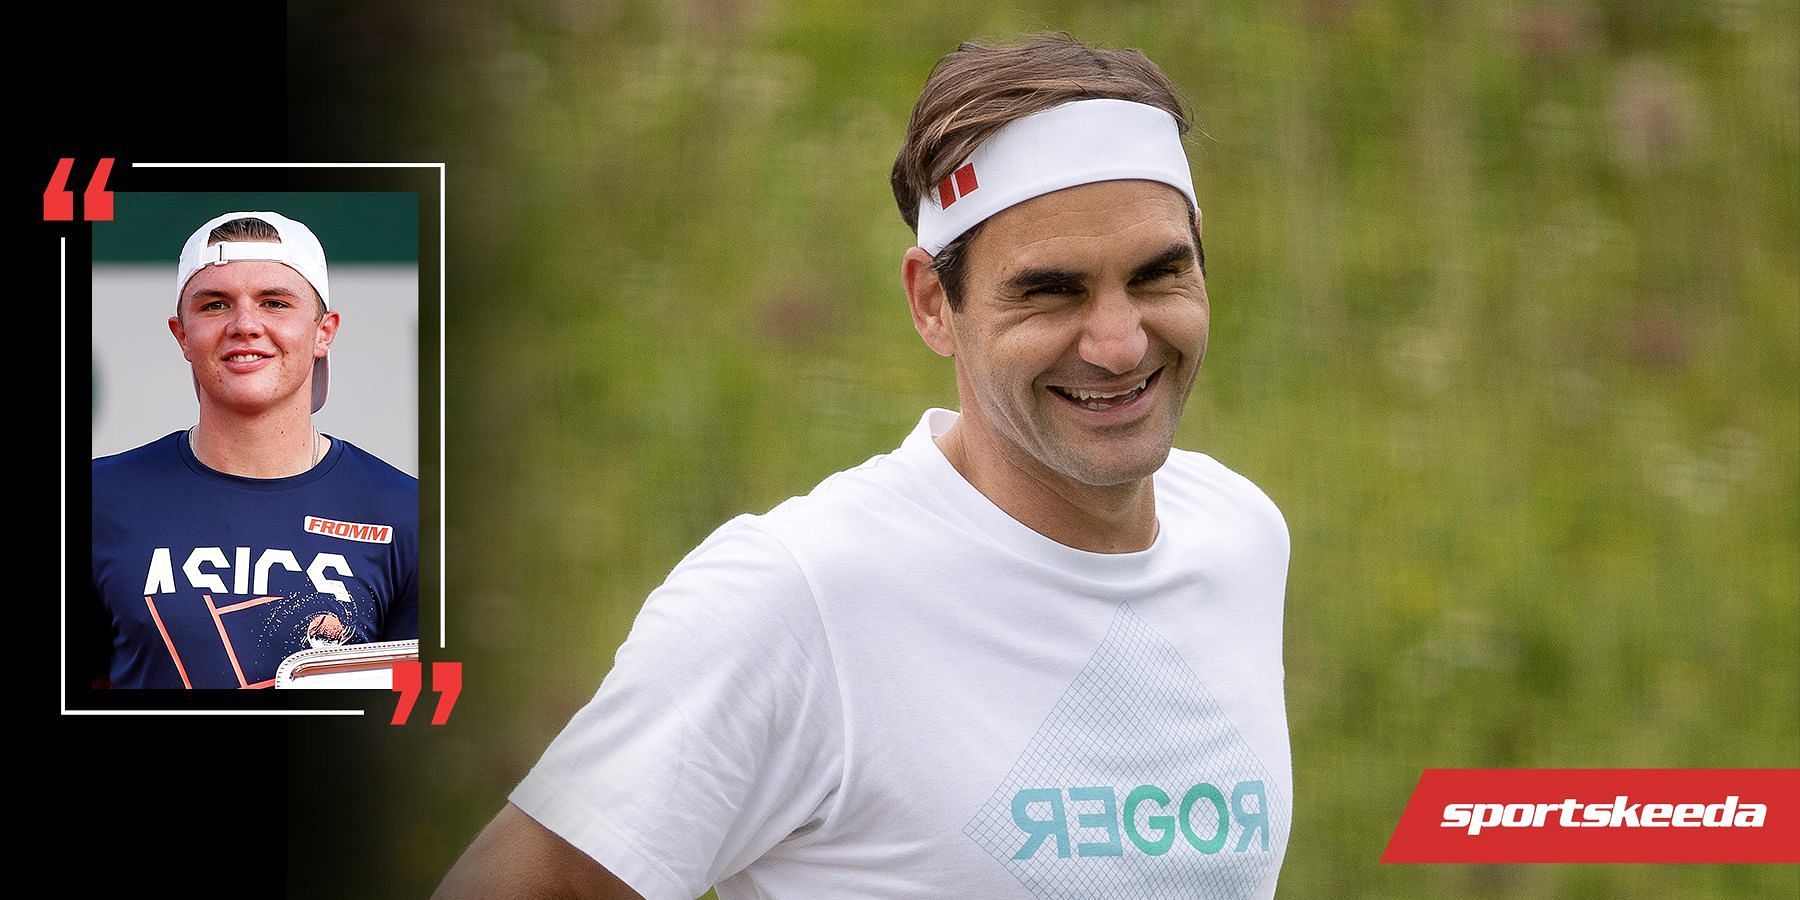 Dominic Stricker cherishes the time spent with Federer on the court